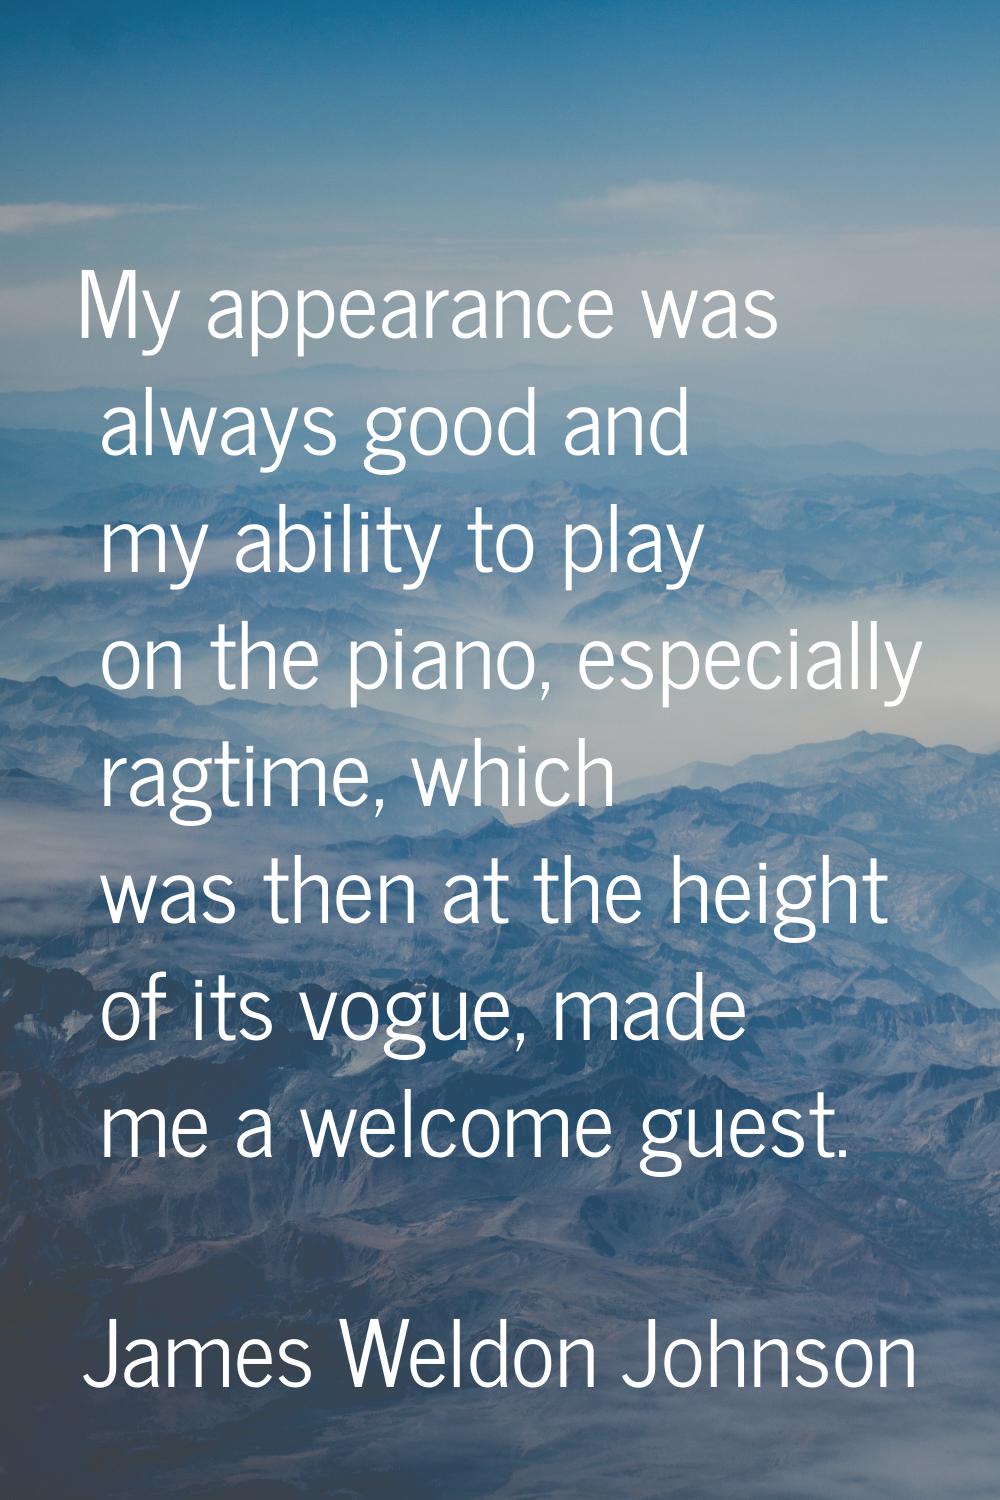 My appearance was always good and my ability to play on the piano, especially ragtime, which was th